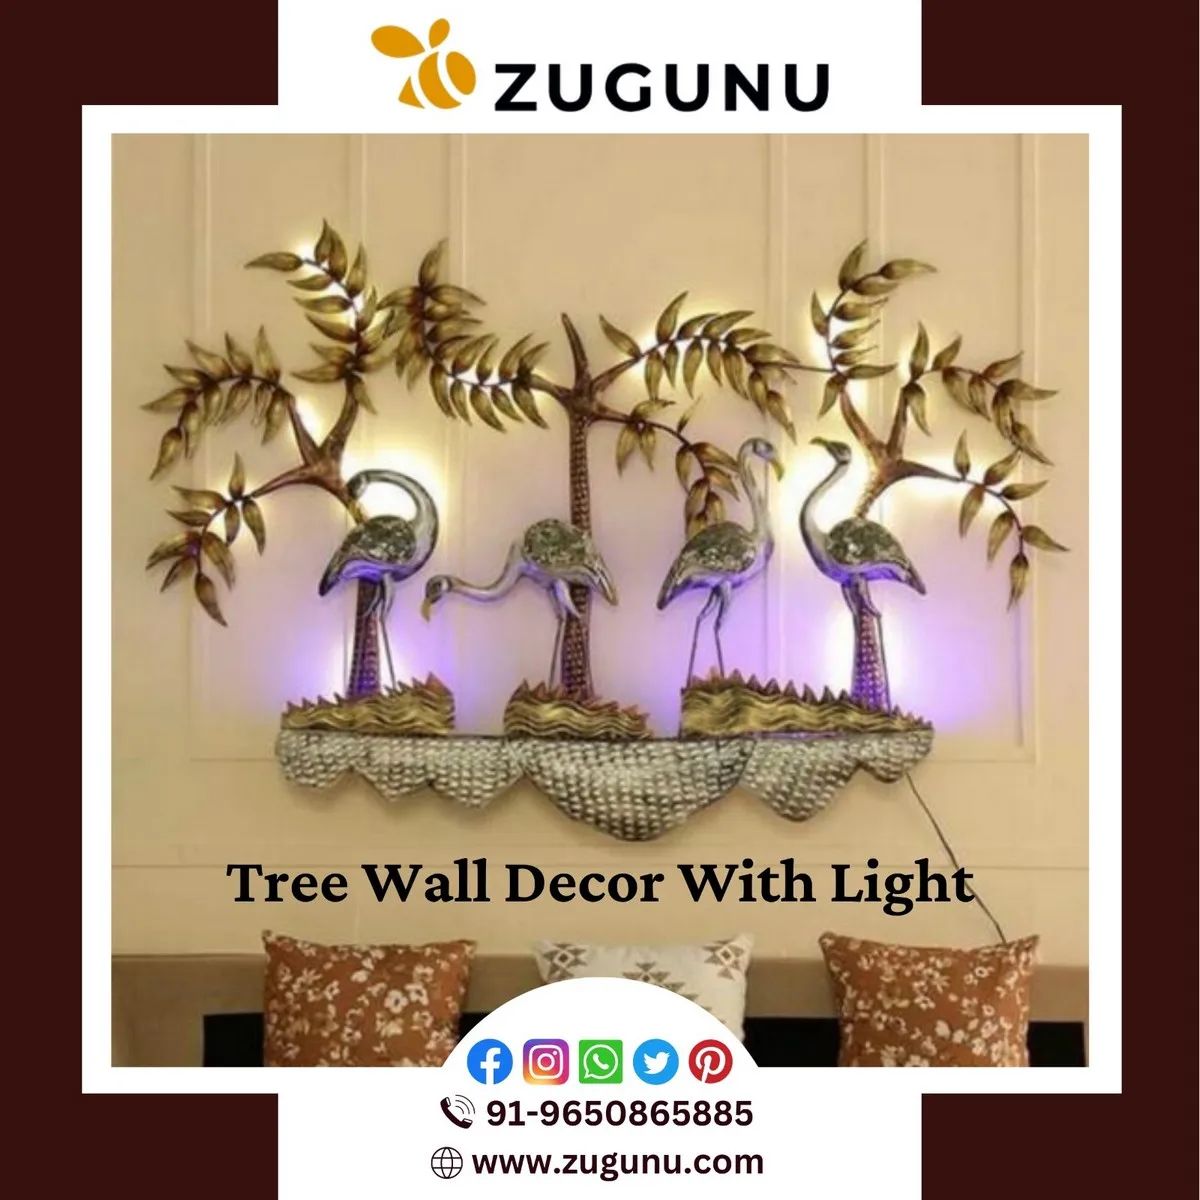 Buy Light Decor Showpieces For Your Home Decor At Best Prices,Gurgaon,Others,Services,77traders